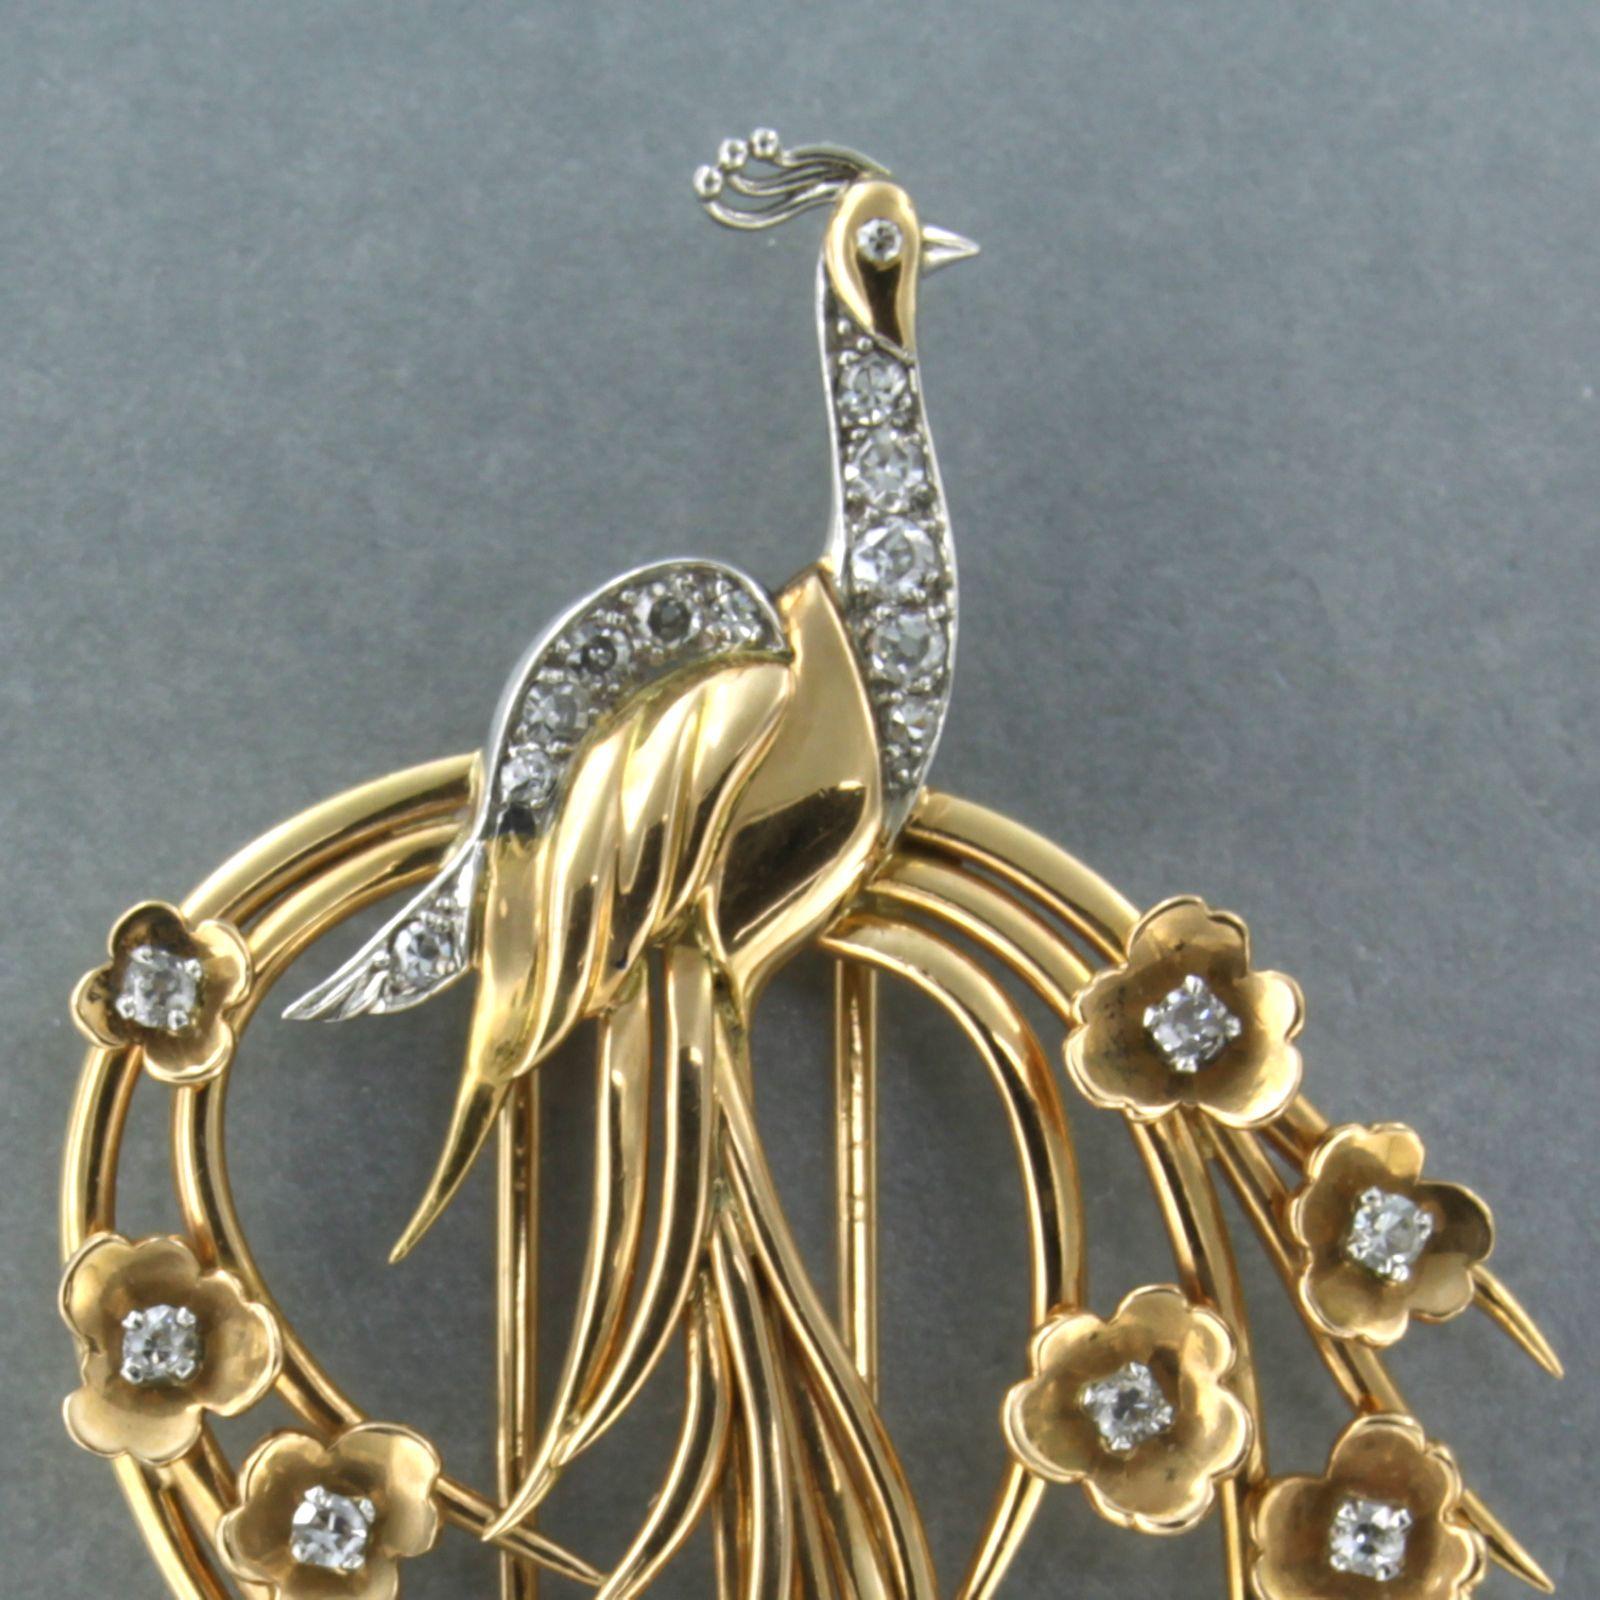 Women's Brooch in a shape of a peacock set with diamonds 18k bicolor gold For Sale